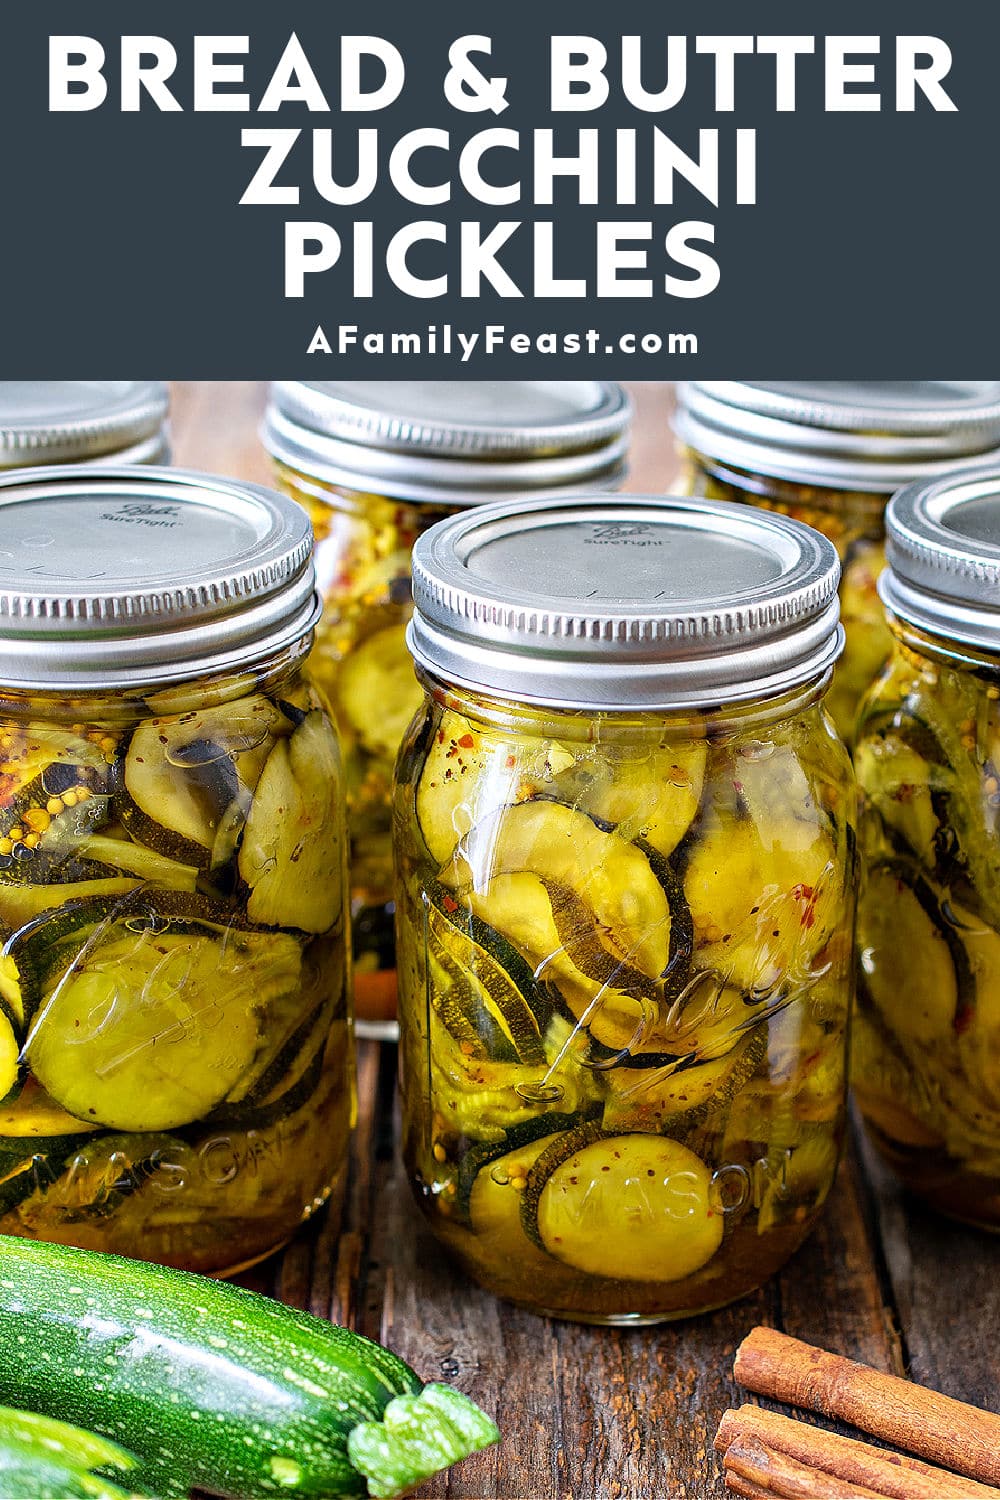 Bread & Butter Zucchini Pickles - A Family Feast